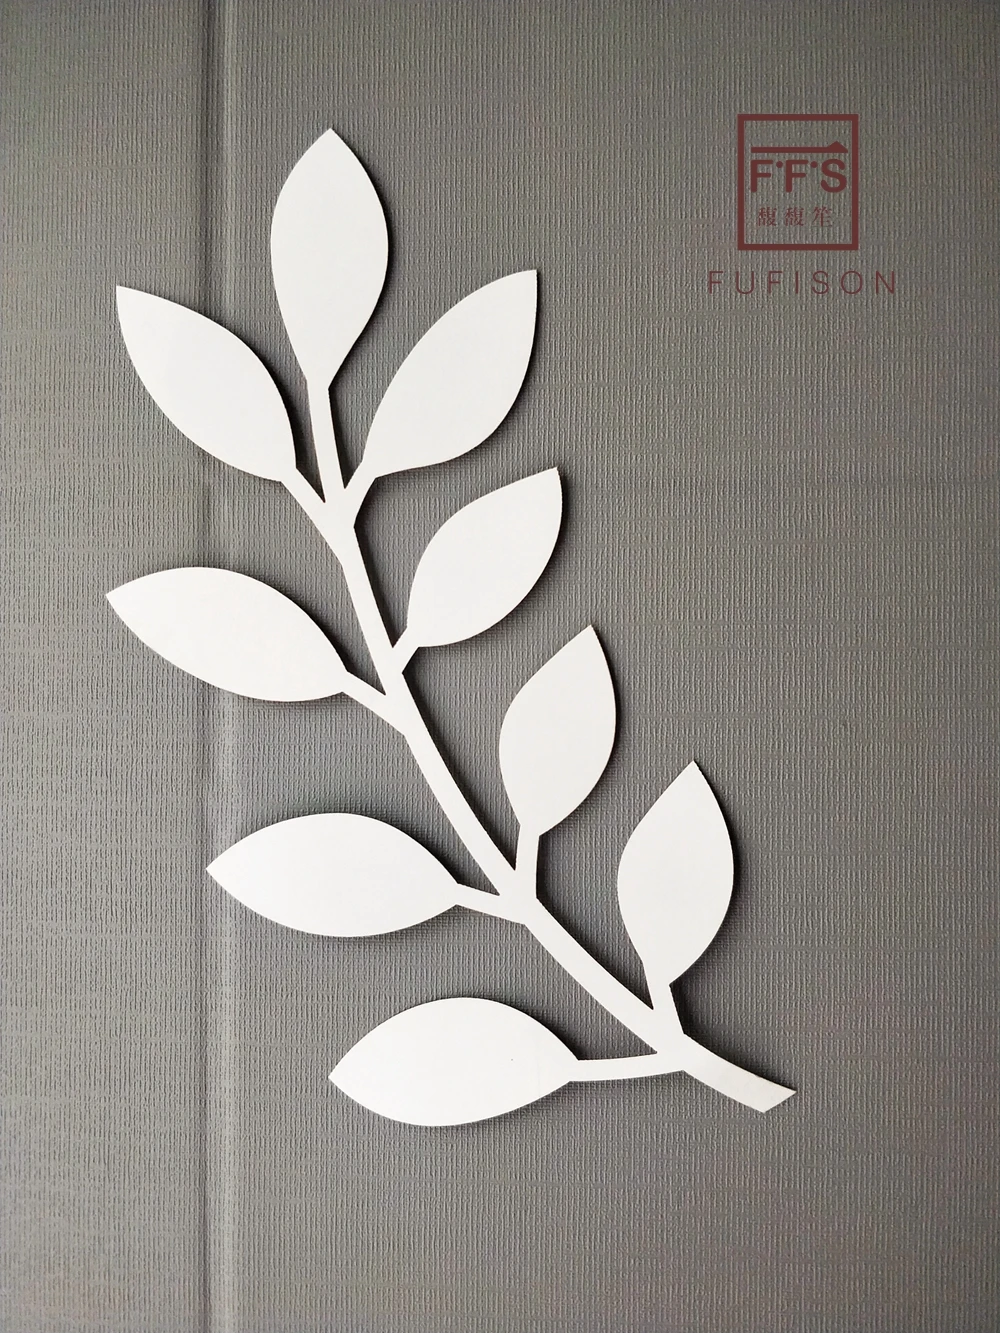 White 3D Paper Flowers Decorations for Wall Decor, Wedding